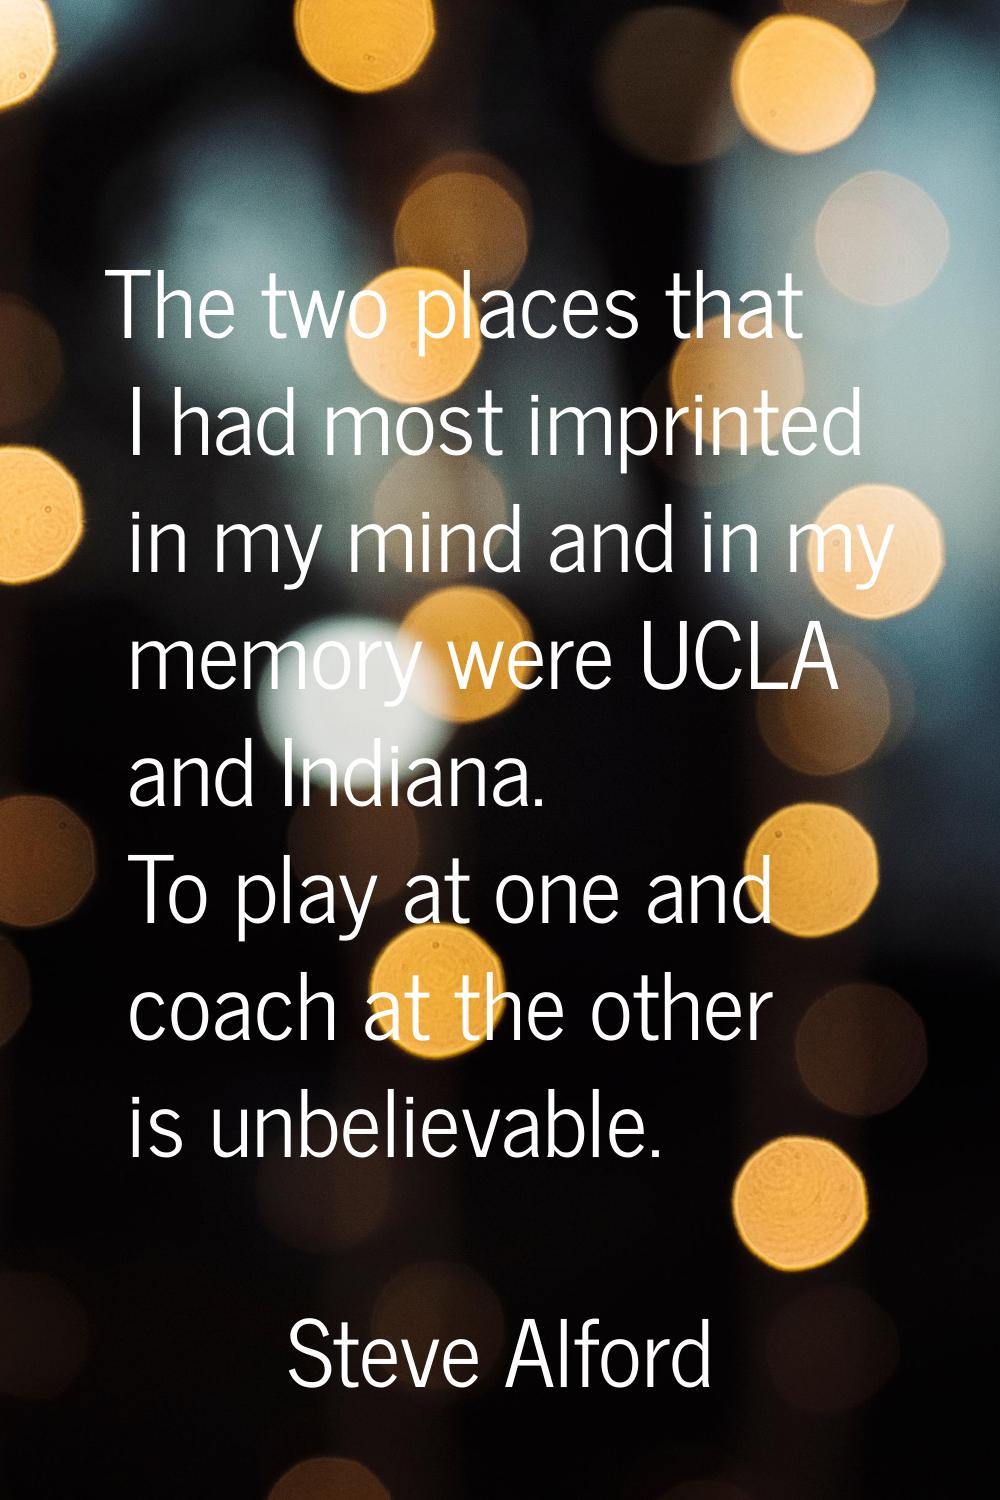 The two places that I had most imprinted in my mind and in my memory were UCLA and Indiana. To play